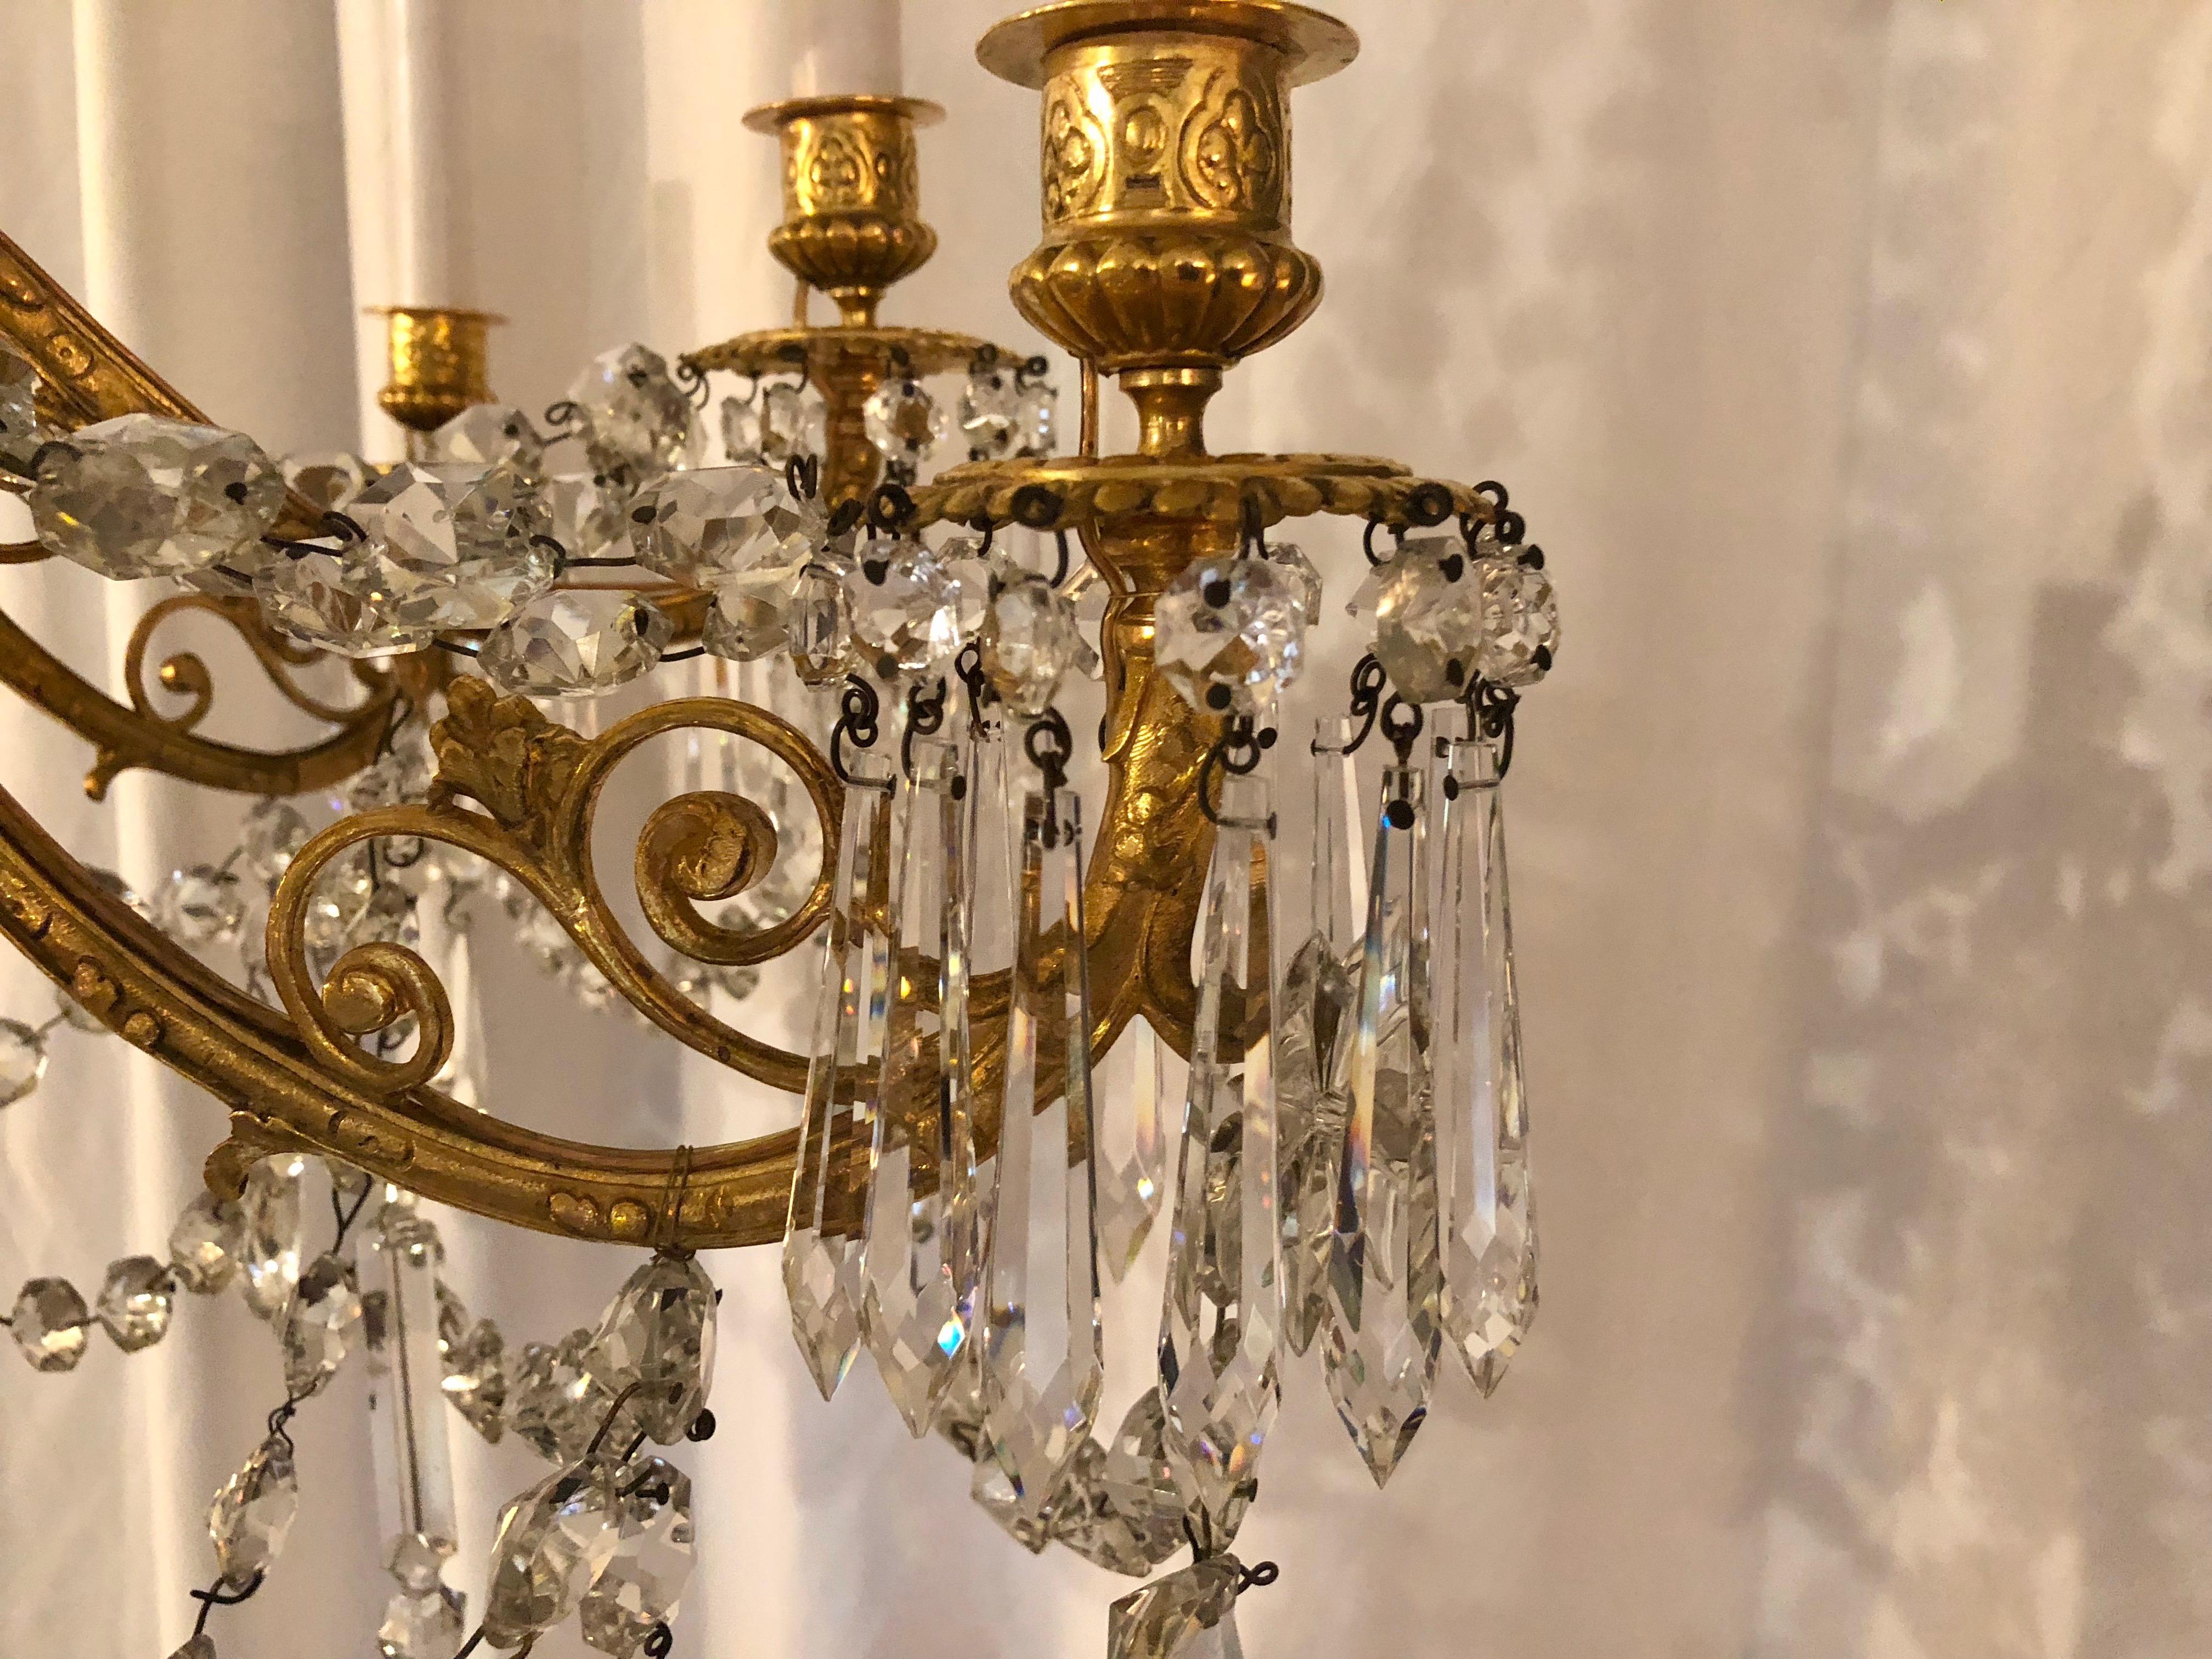 Antique French bronze Doré and crystal chandelier.